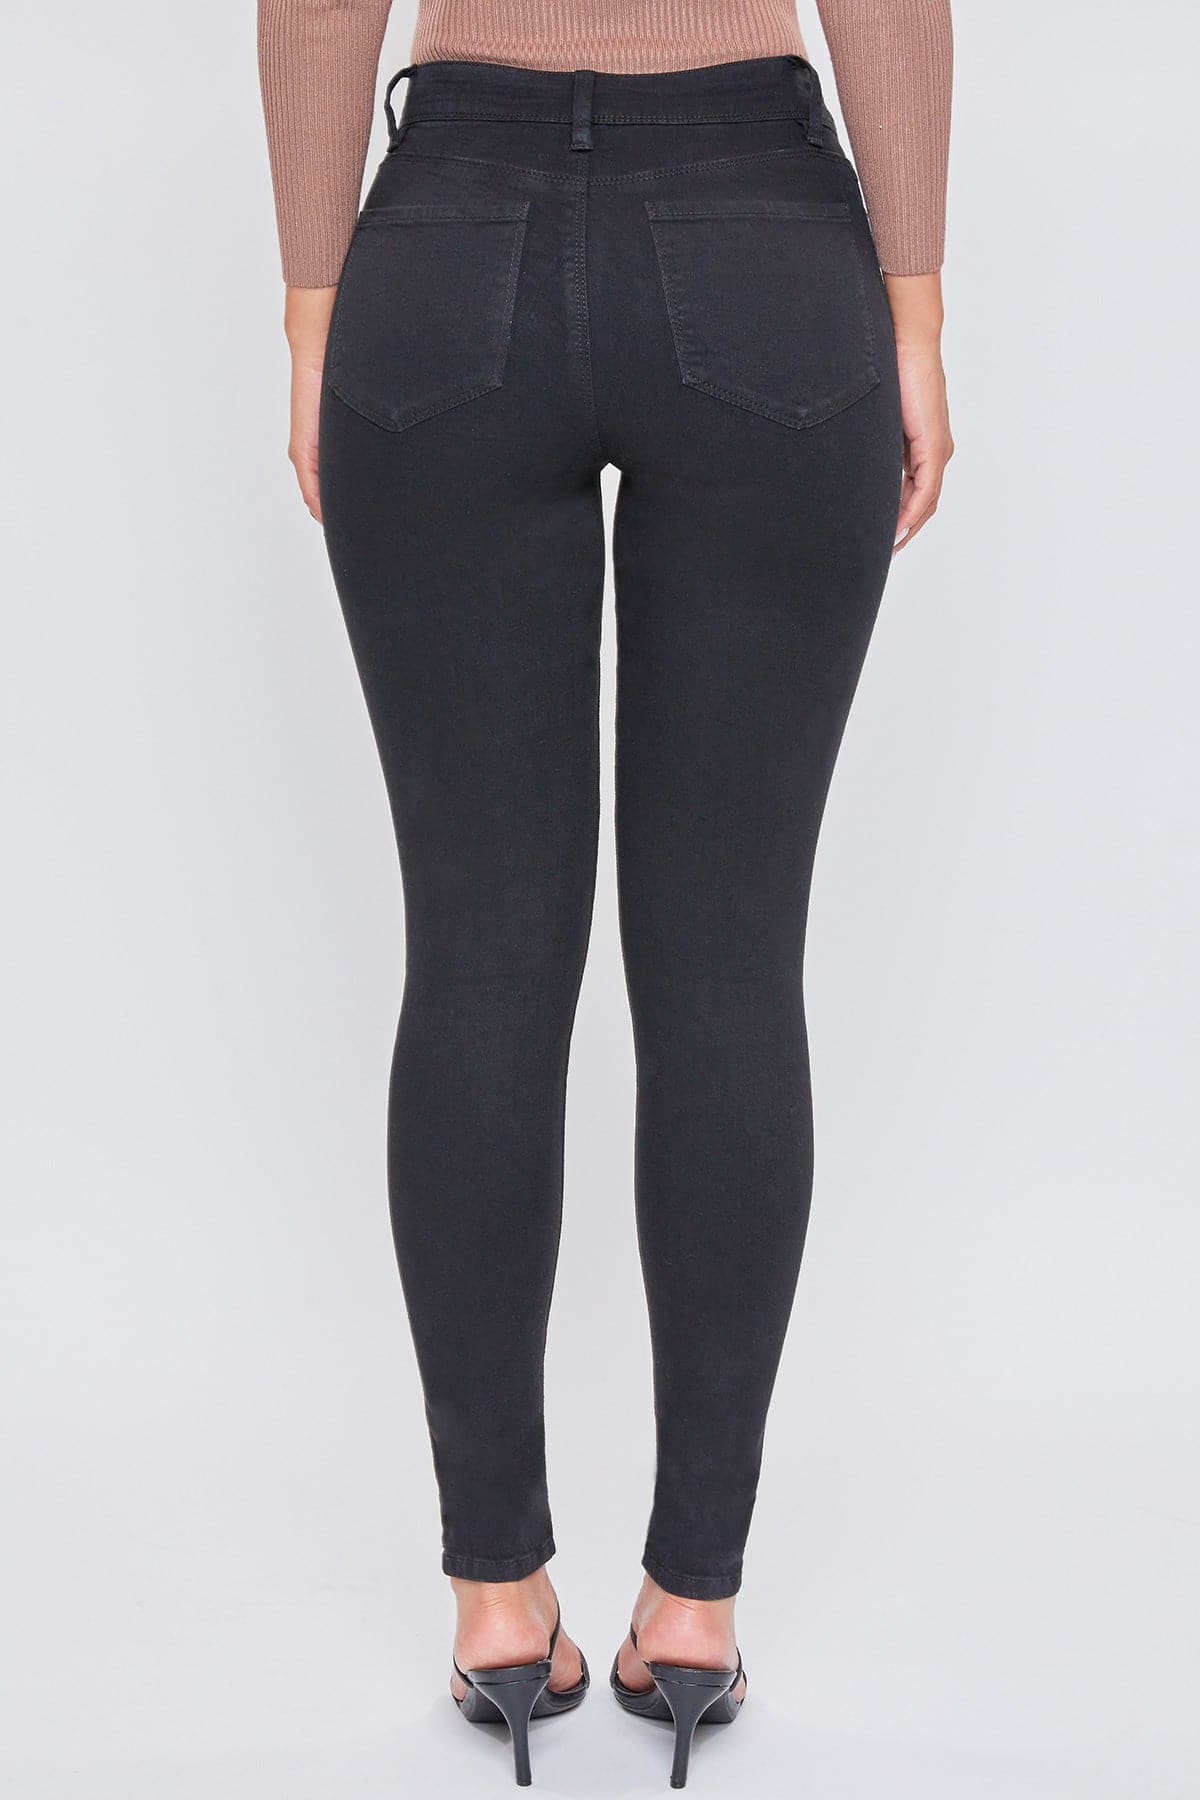 Women's Essential Sustainable Skinny Jeans